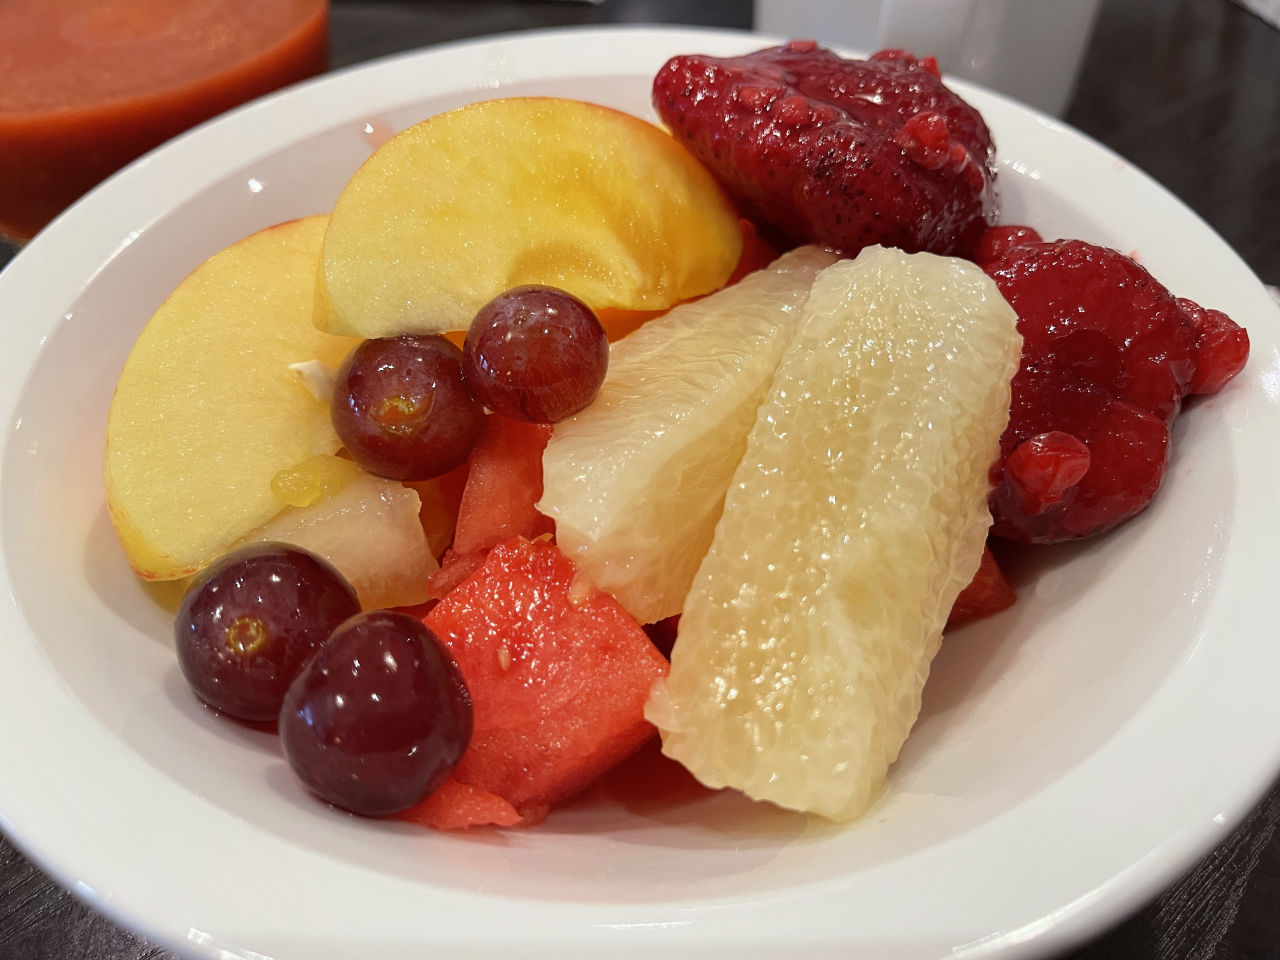 Our Healthy Fruit Bowl